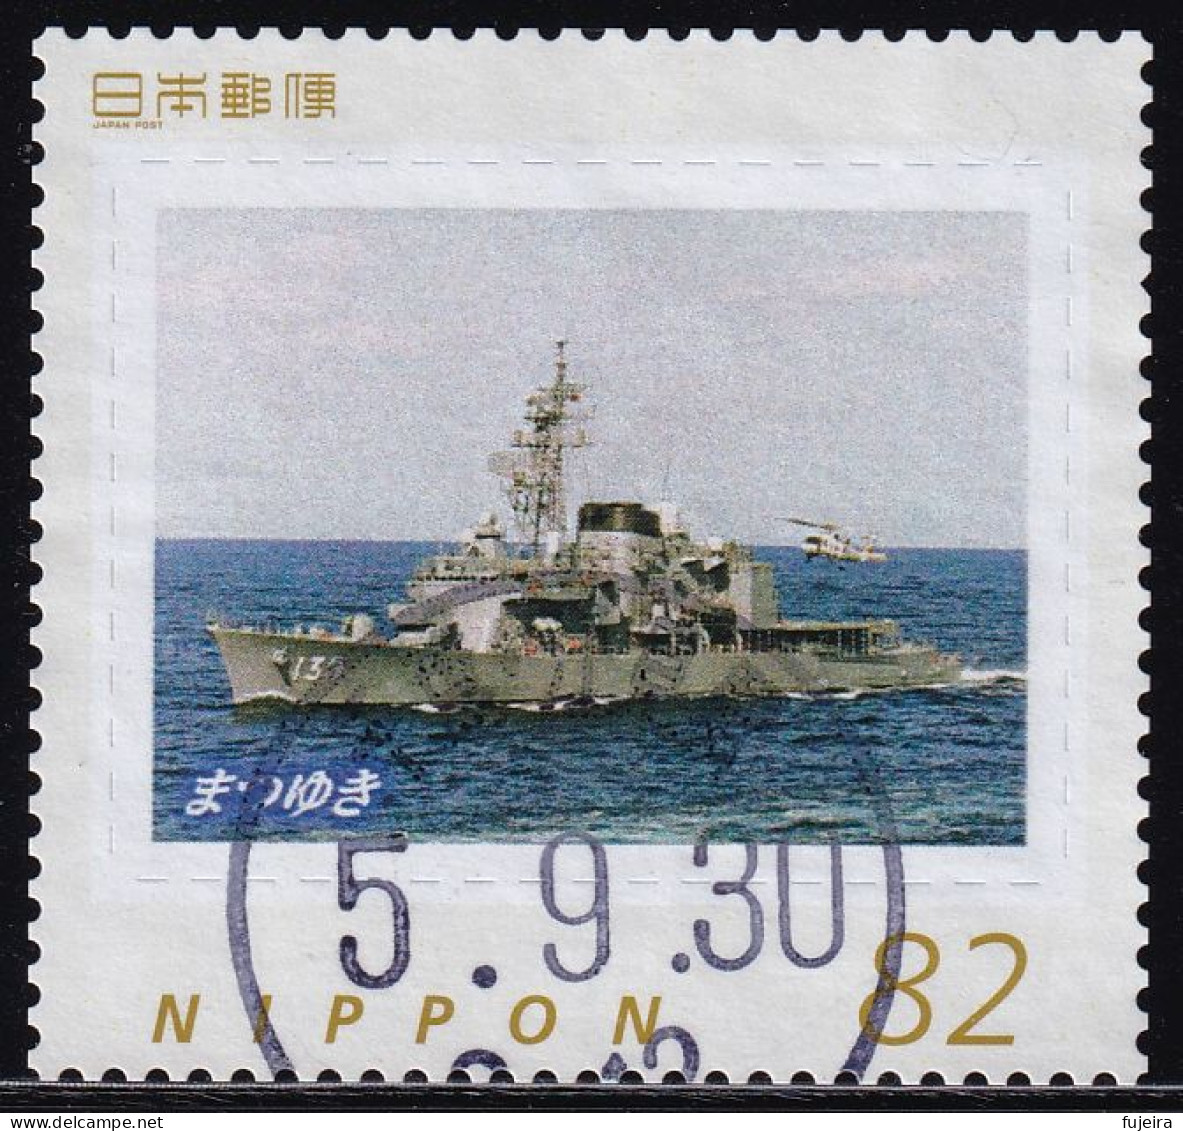 Japan Personalized Stamp, Ship Helicopter (jpv9987) Used - Used Stamps